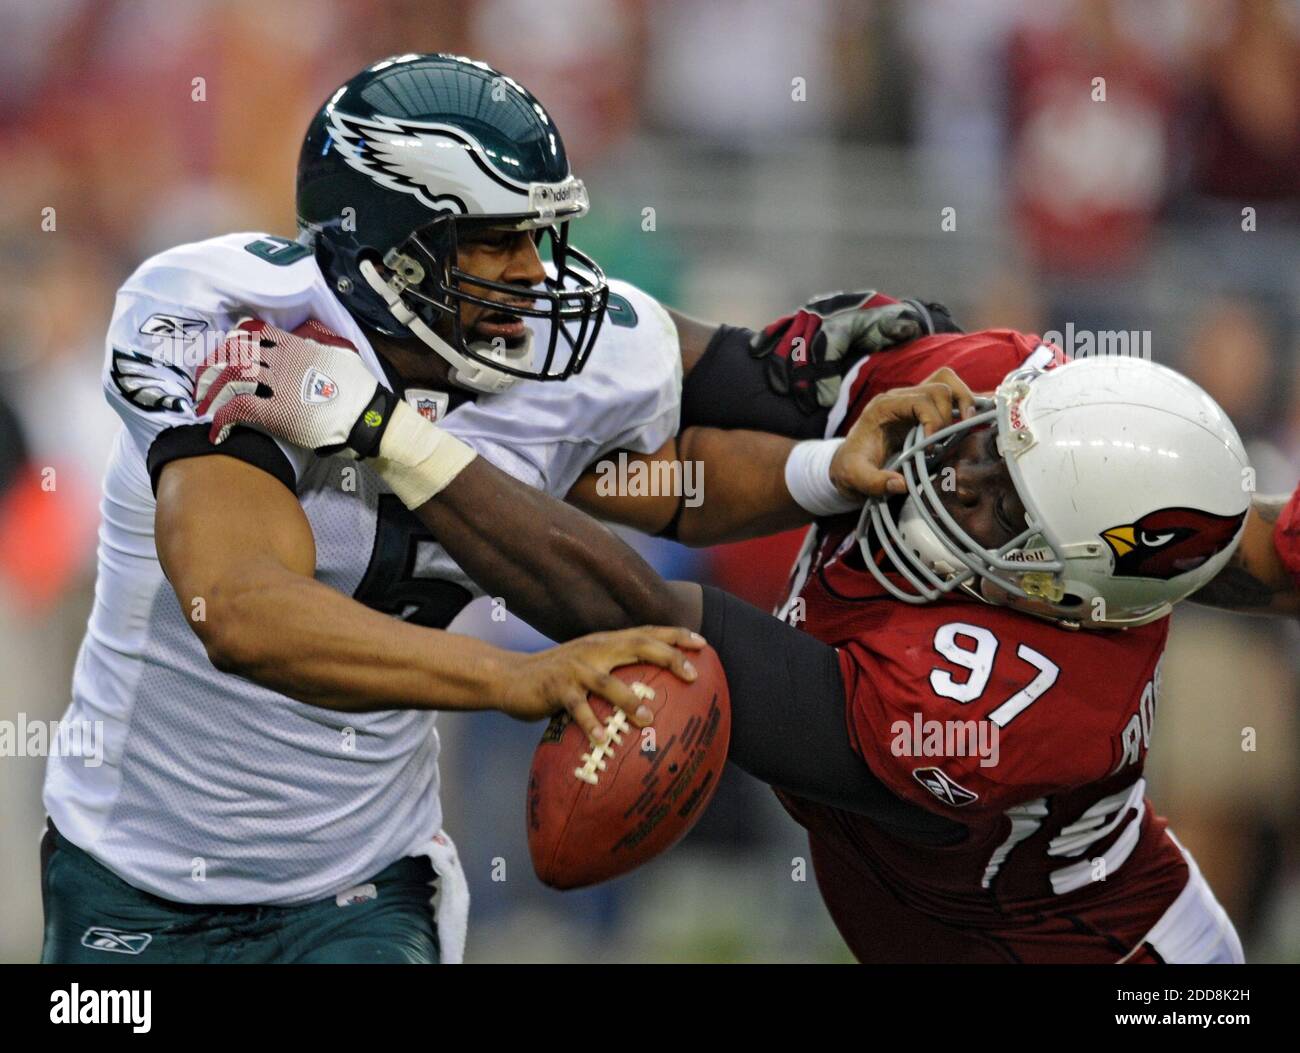 NO FILM, NO VIDEO, NO TV, NO DOCUMENTARY - Philadelphia Eagles quarterback Donovan Mcnabb, left, does hand-to-hand combat with Arizona Cardinals defensive tackle Bryan Robinson during third quarter action in the NFC Championship game at the University of Phoenix Stadium in Phoenix Stadium in Phoenix, AZ, USA on January 18, 2009. The Cardinals defeated the Eagles, 32-25. Photo by Clem Murray/Philadelphia Inquirer/MCT/Cameleon/ABACAPRESS.COM Stock Photo